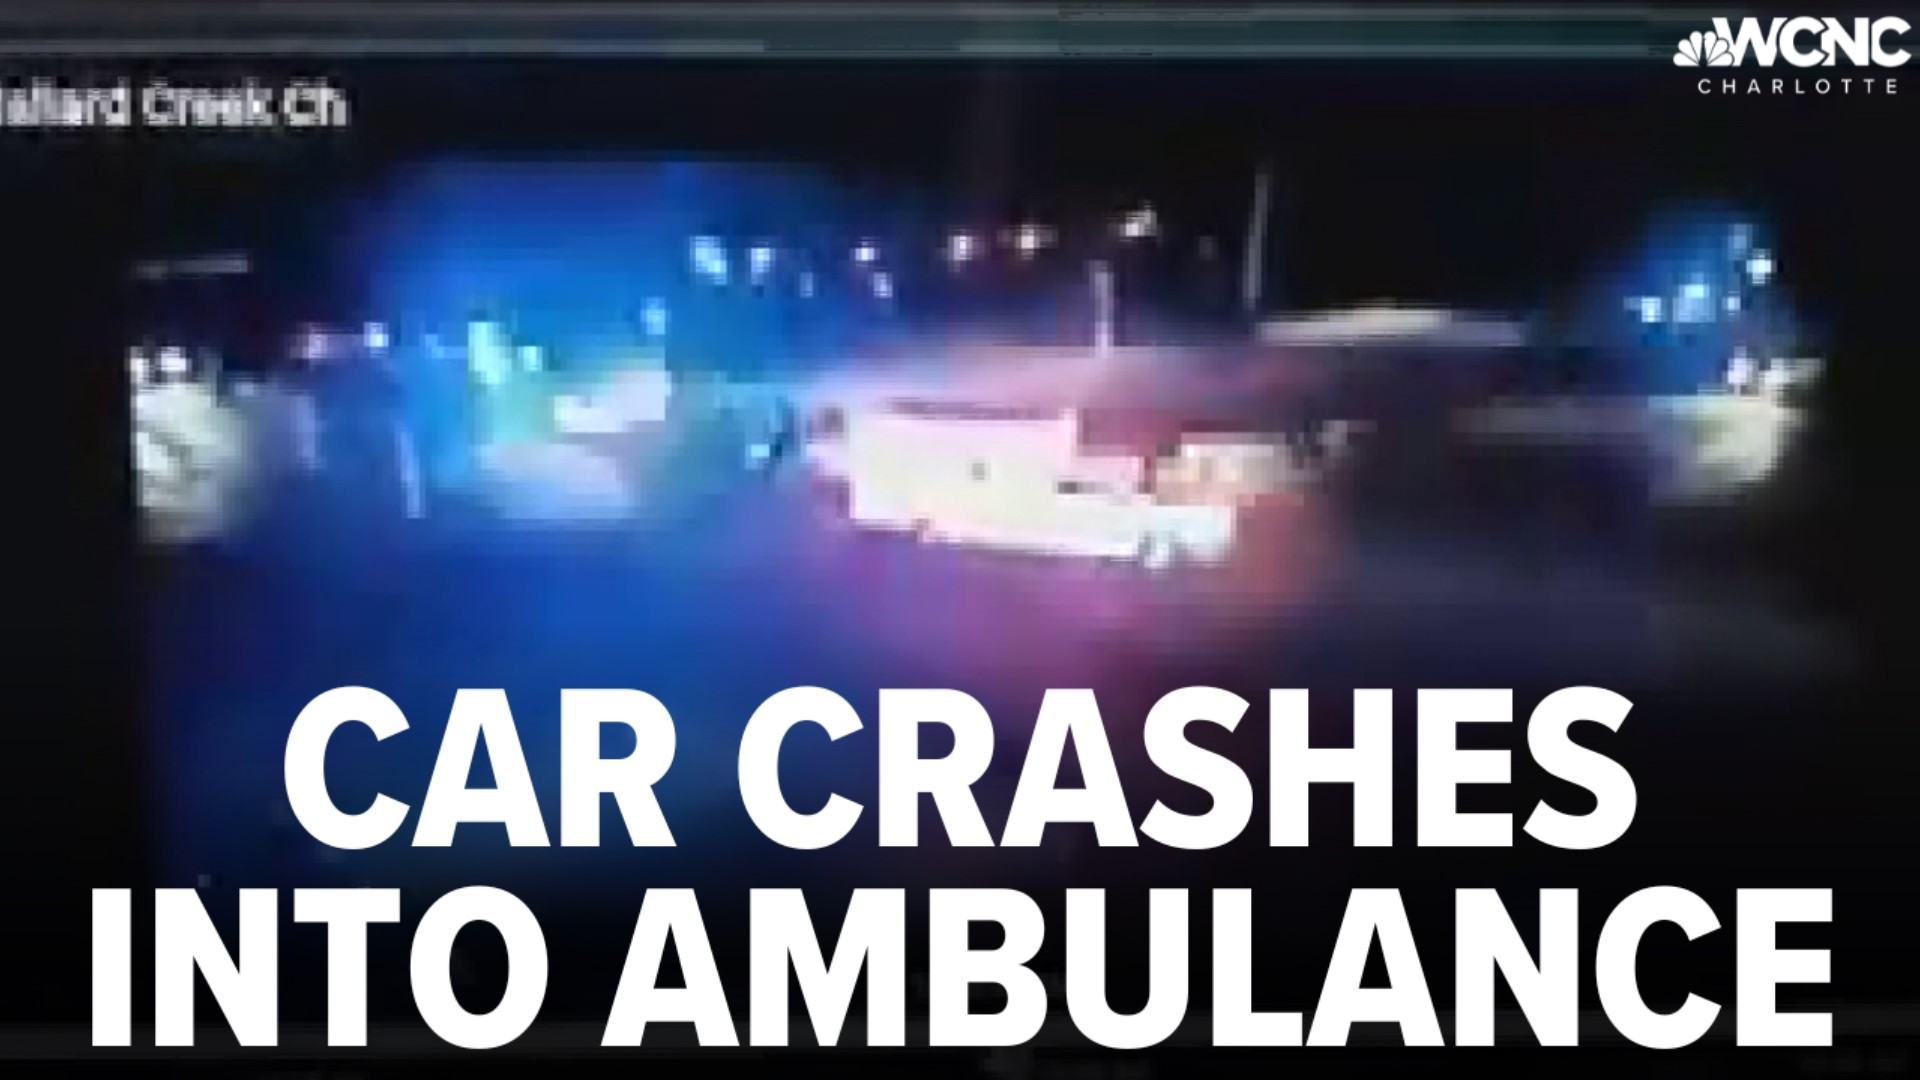 A driver is facing charges after crashing into an ambulance and injuring multiple people, including two paramedics, police said.